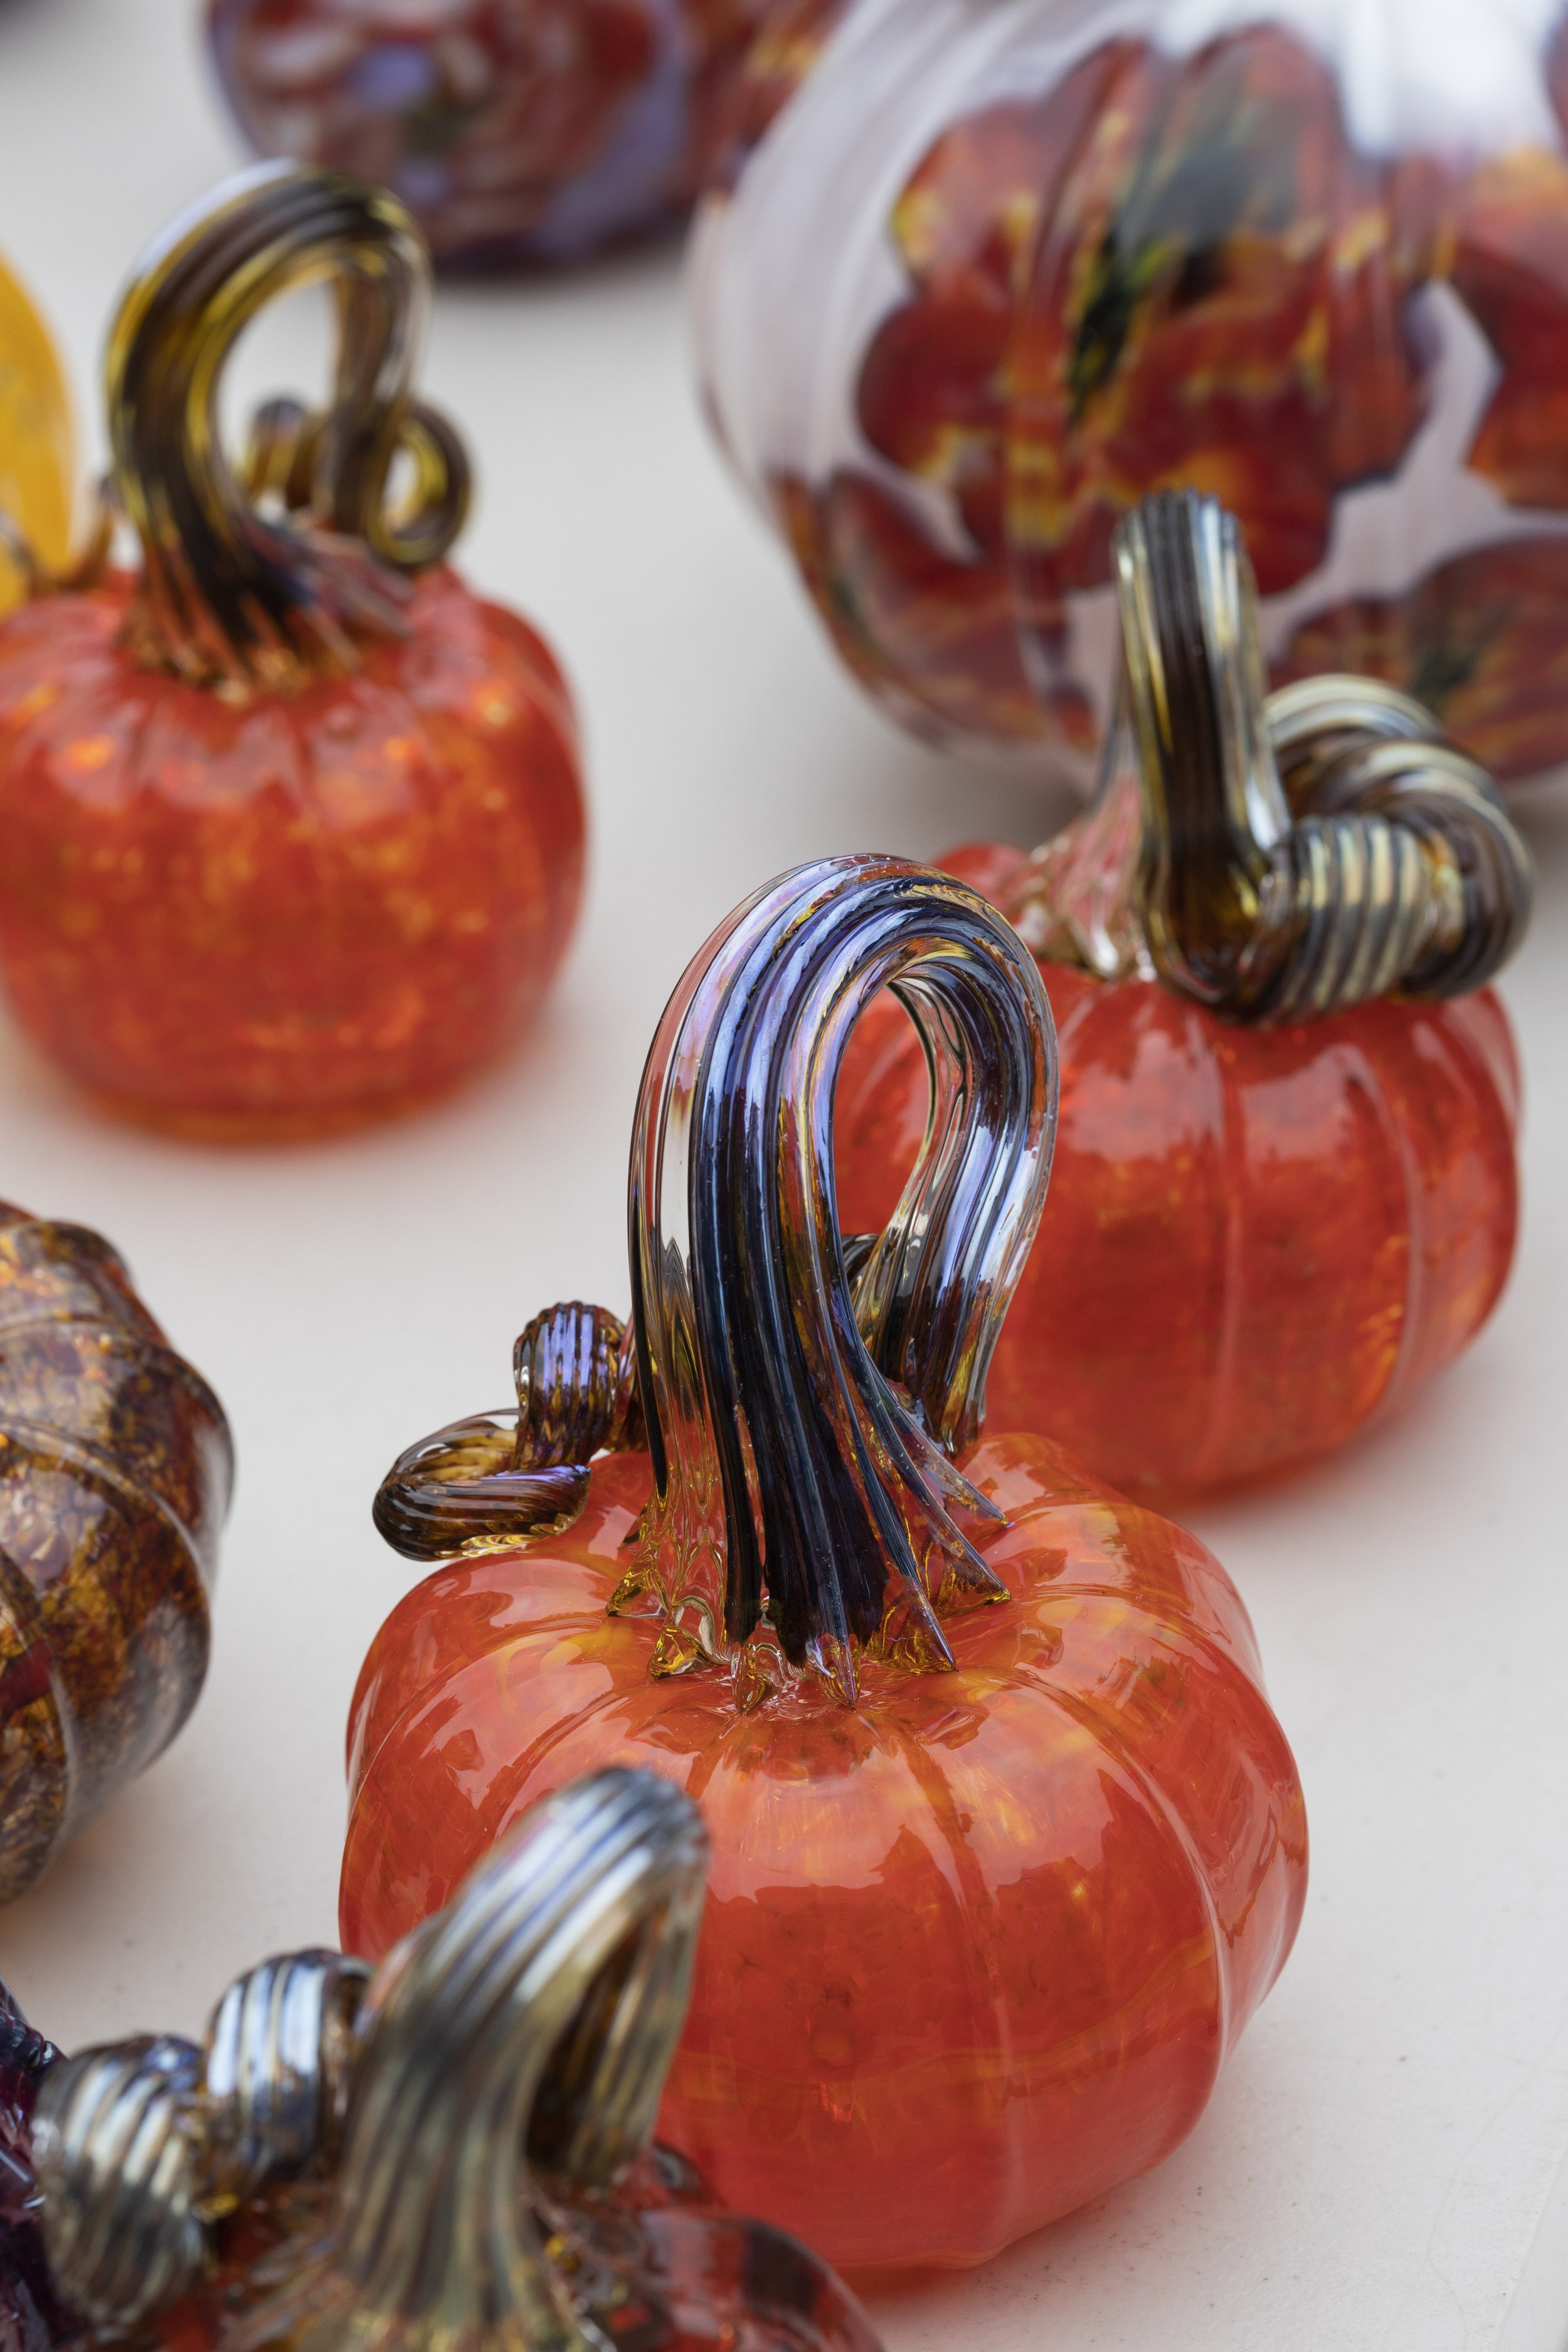  The glass blowing class at Santa Monica College sold handmade pumpkins during the college fair on October 13, 2022. Santa Monica, Calif. (Jamie Addison | The Corsair) 